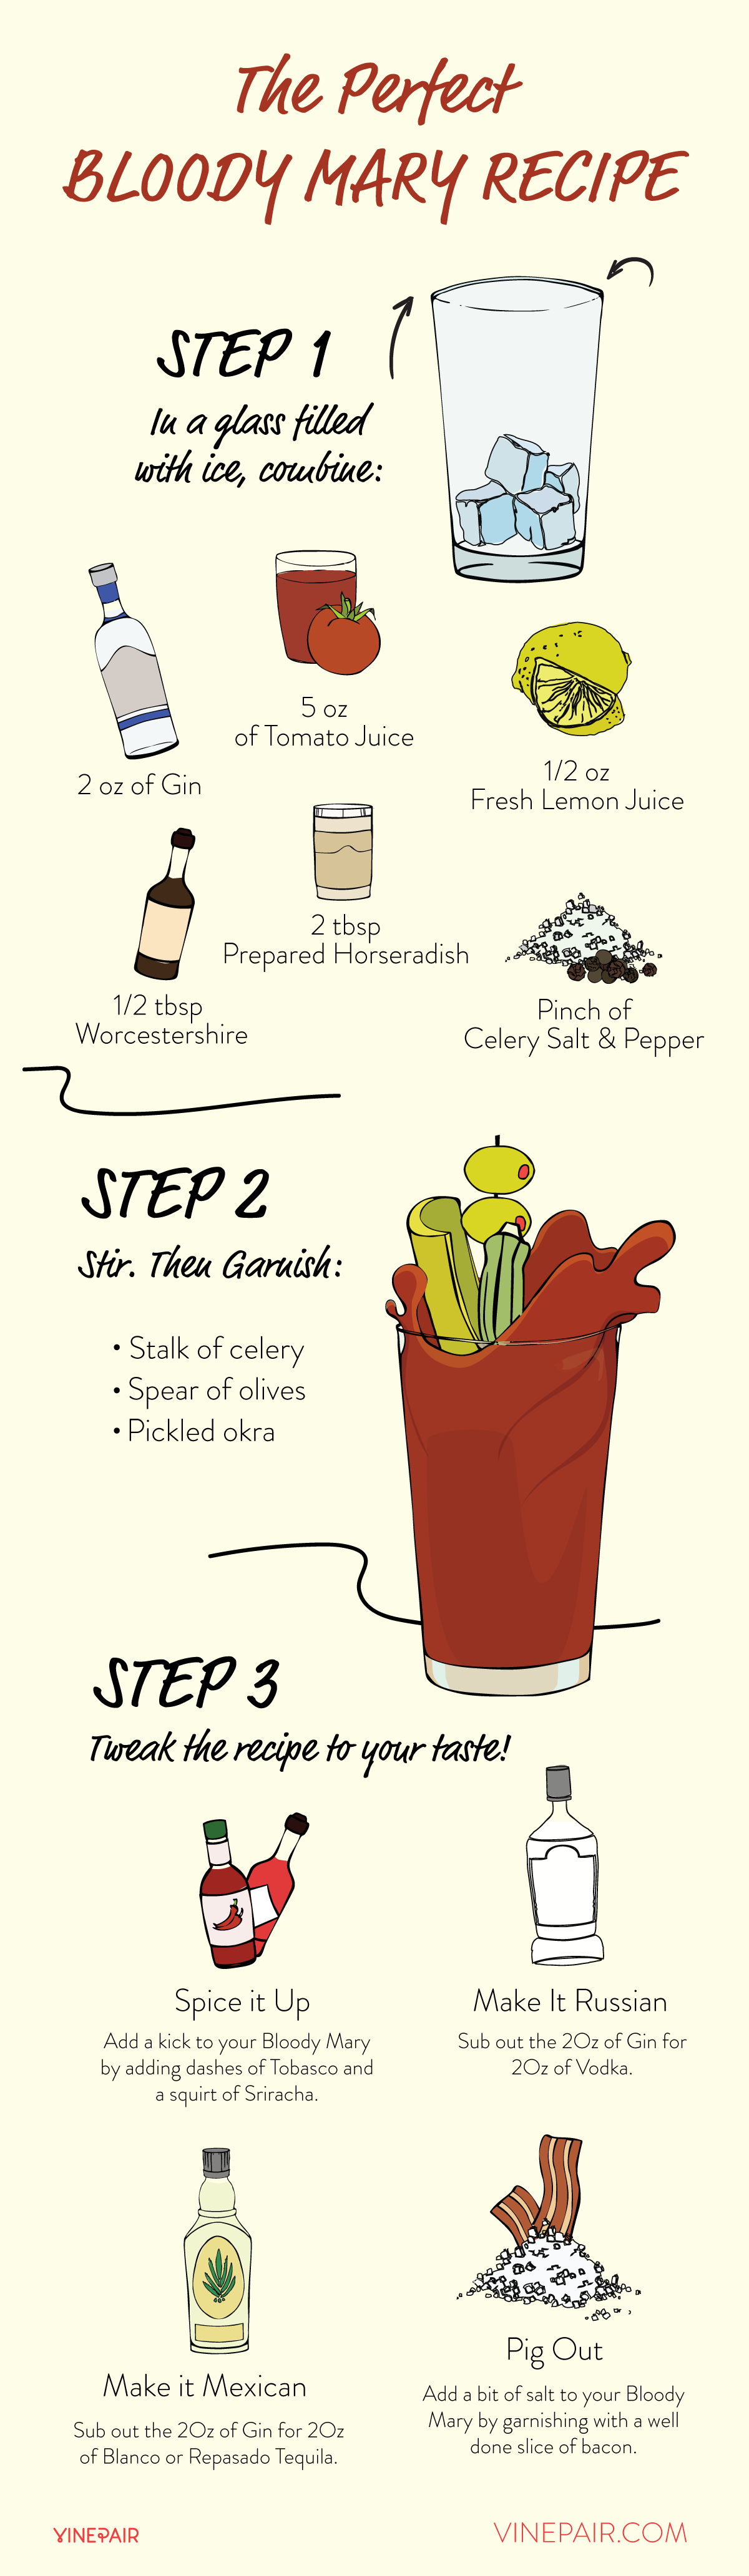 The Perfect Bloody Mary Recipe [Illustrated Infographic]